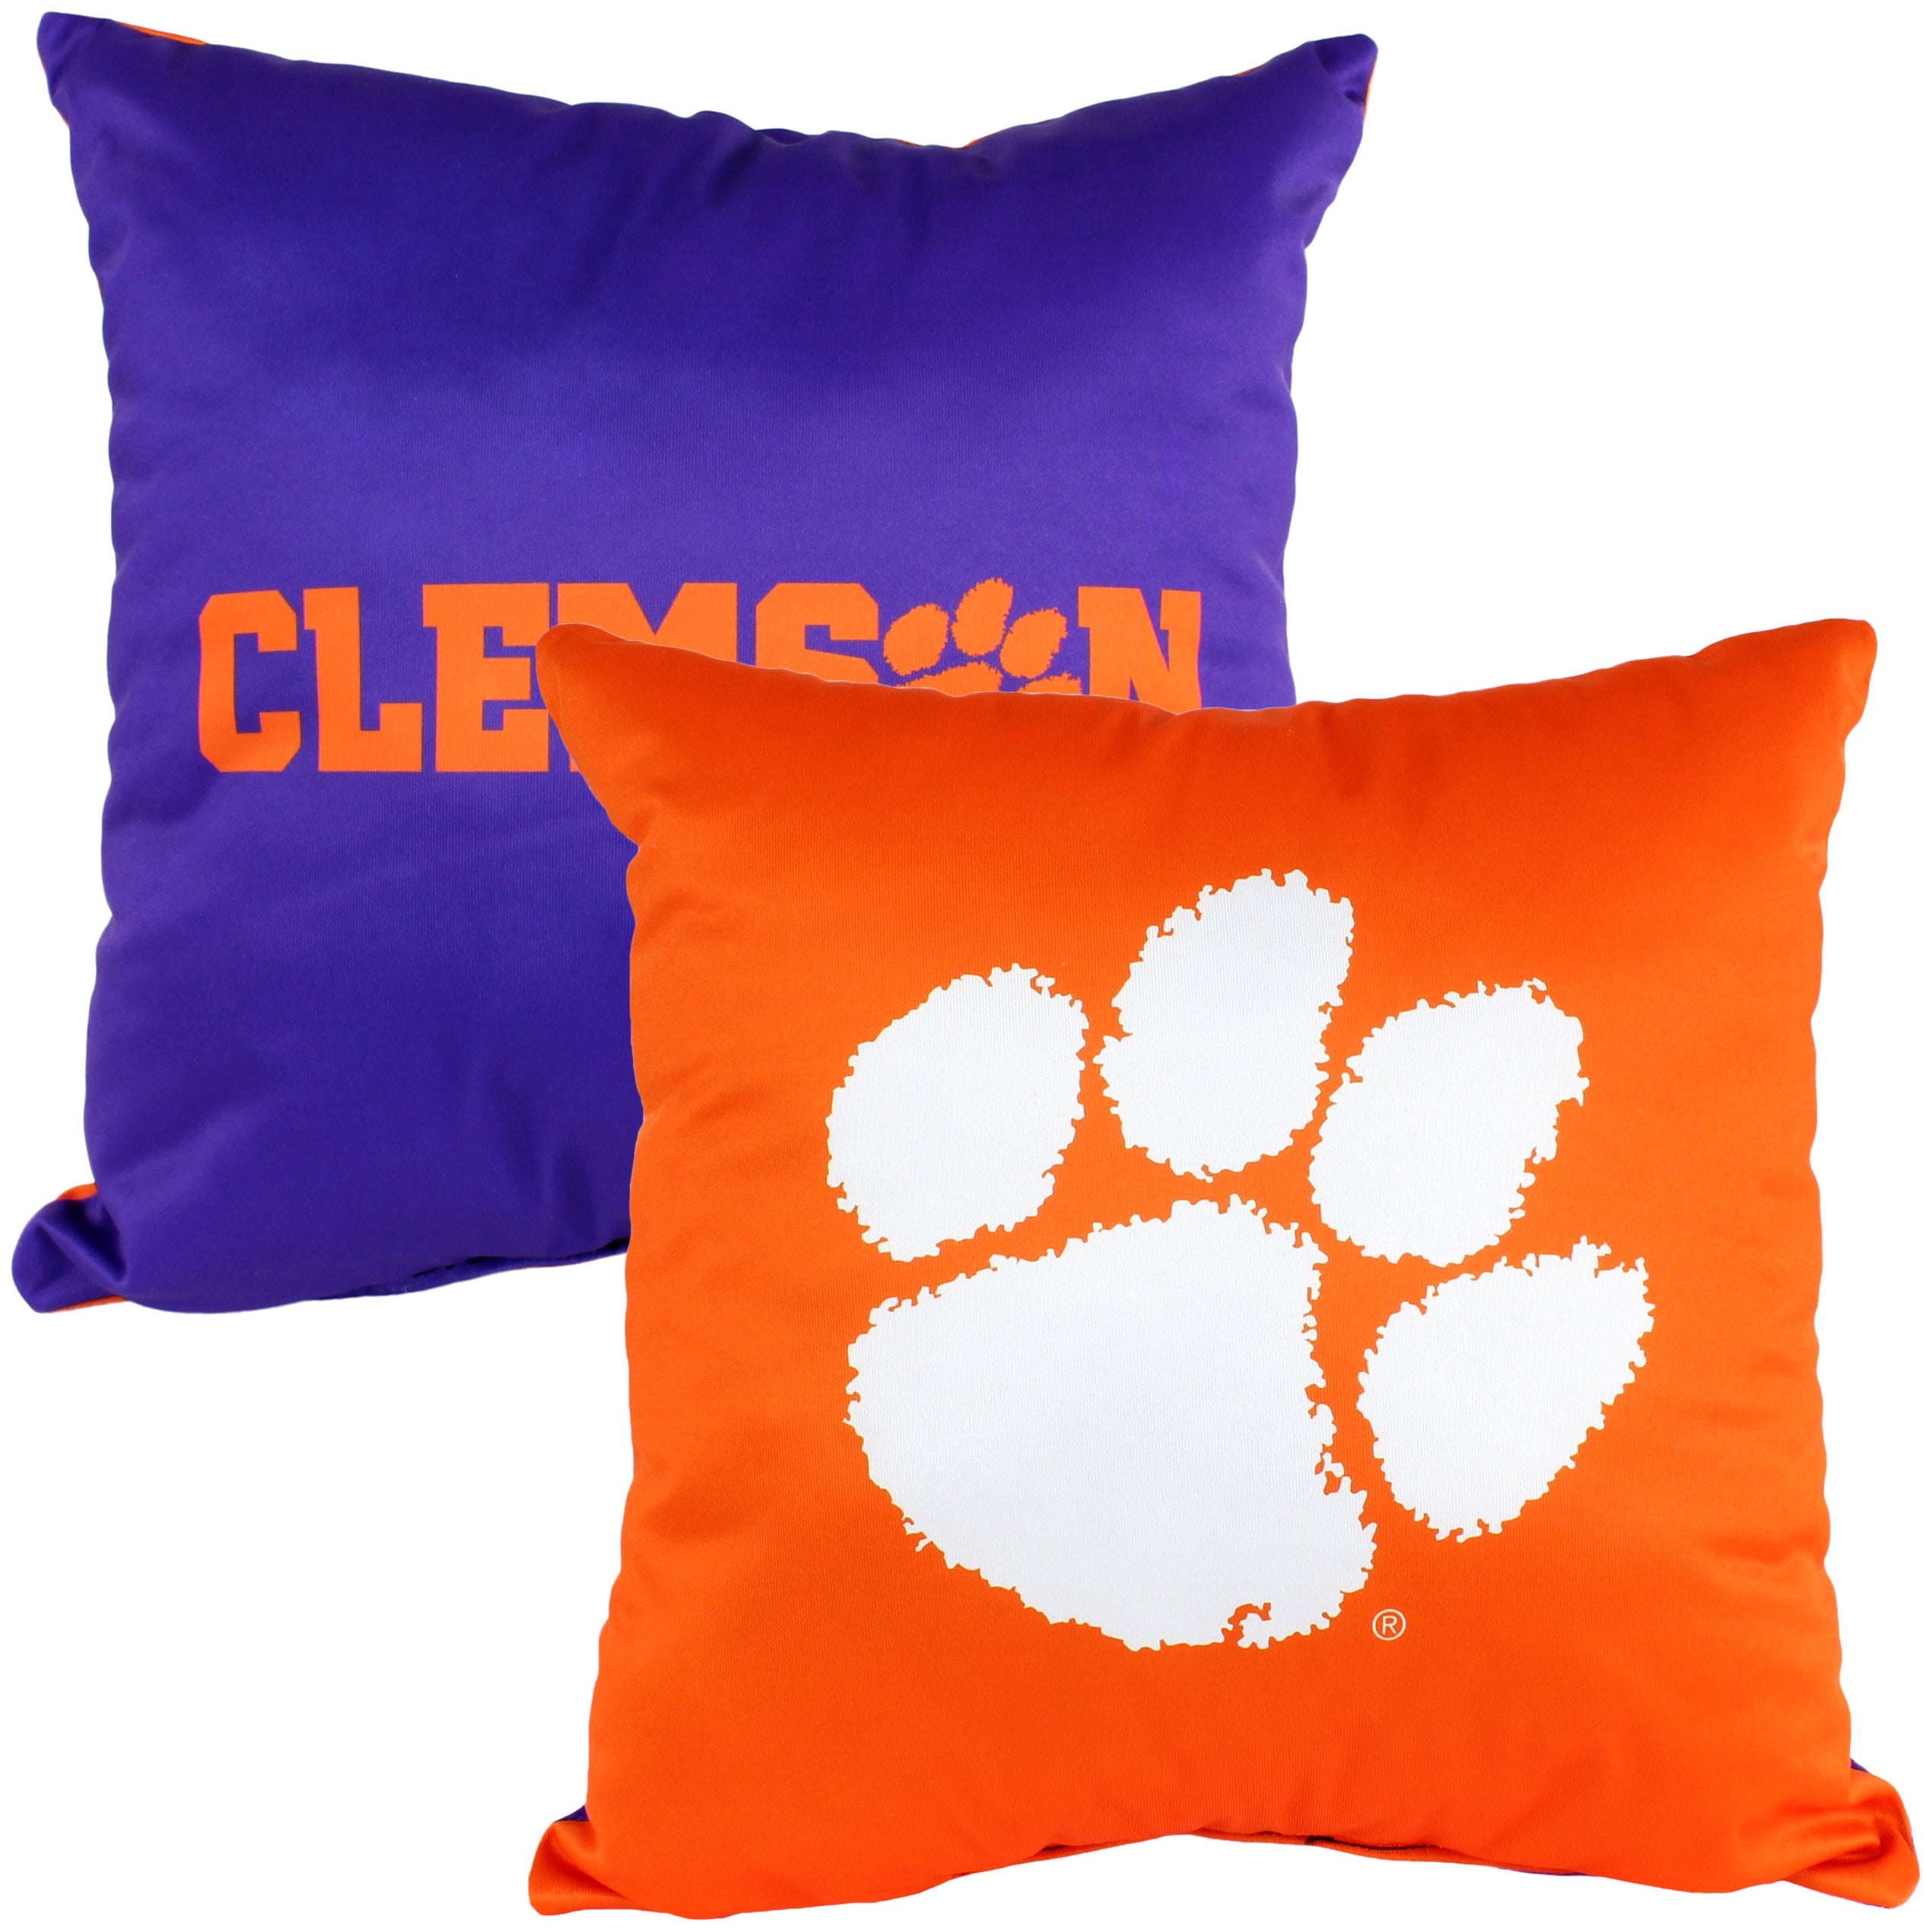 Clemson Tigers 16 inch Reversible Decorative Pillow - image 4 of 4